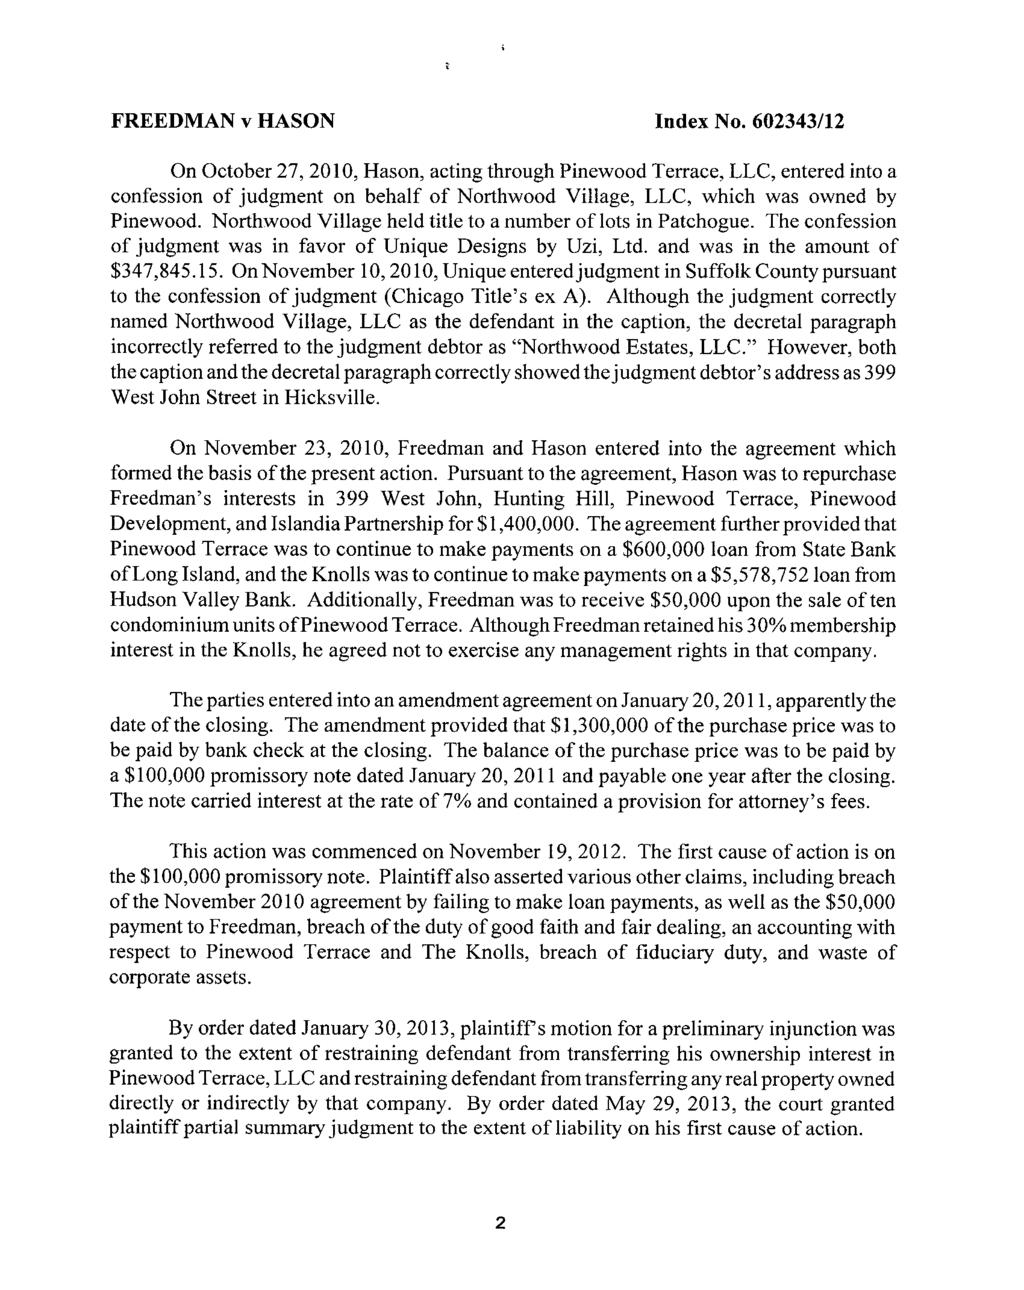 [* 2] On October 27, 2010, Hason, acting through Pinewood Terrace, LLC, entered into a confession of judgment on behalf of Northwood Village, LLC, which was owned by Pinewood.